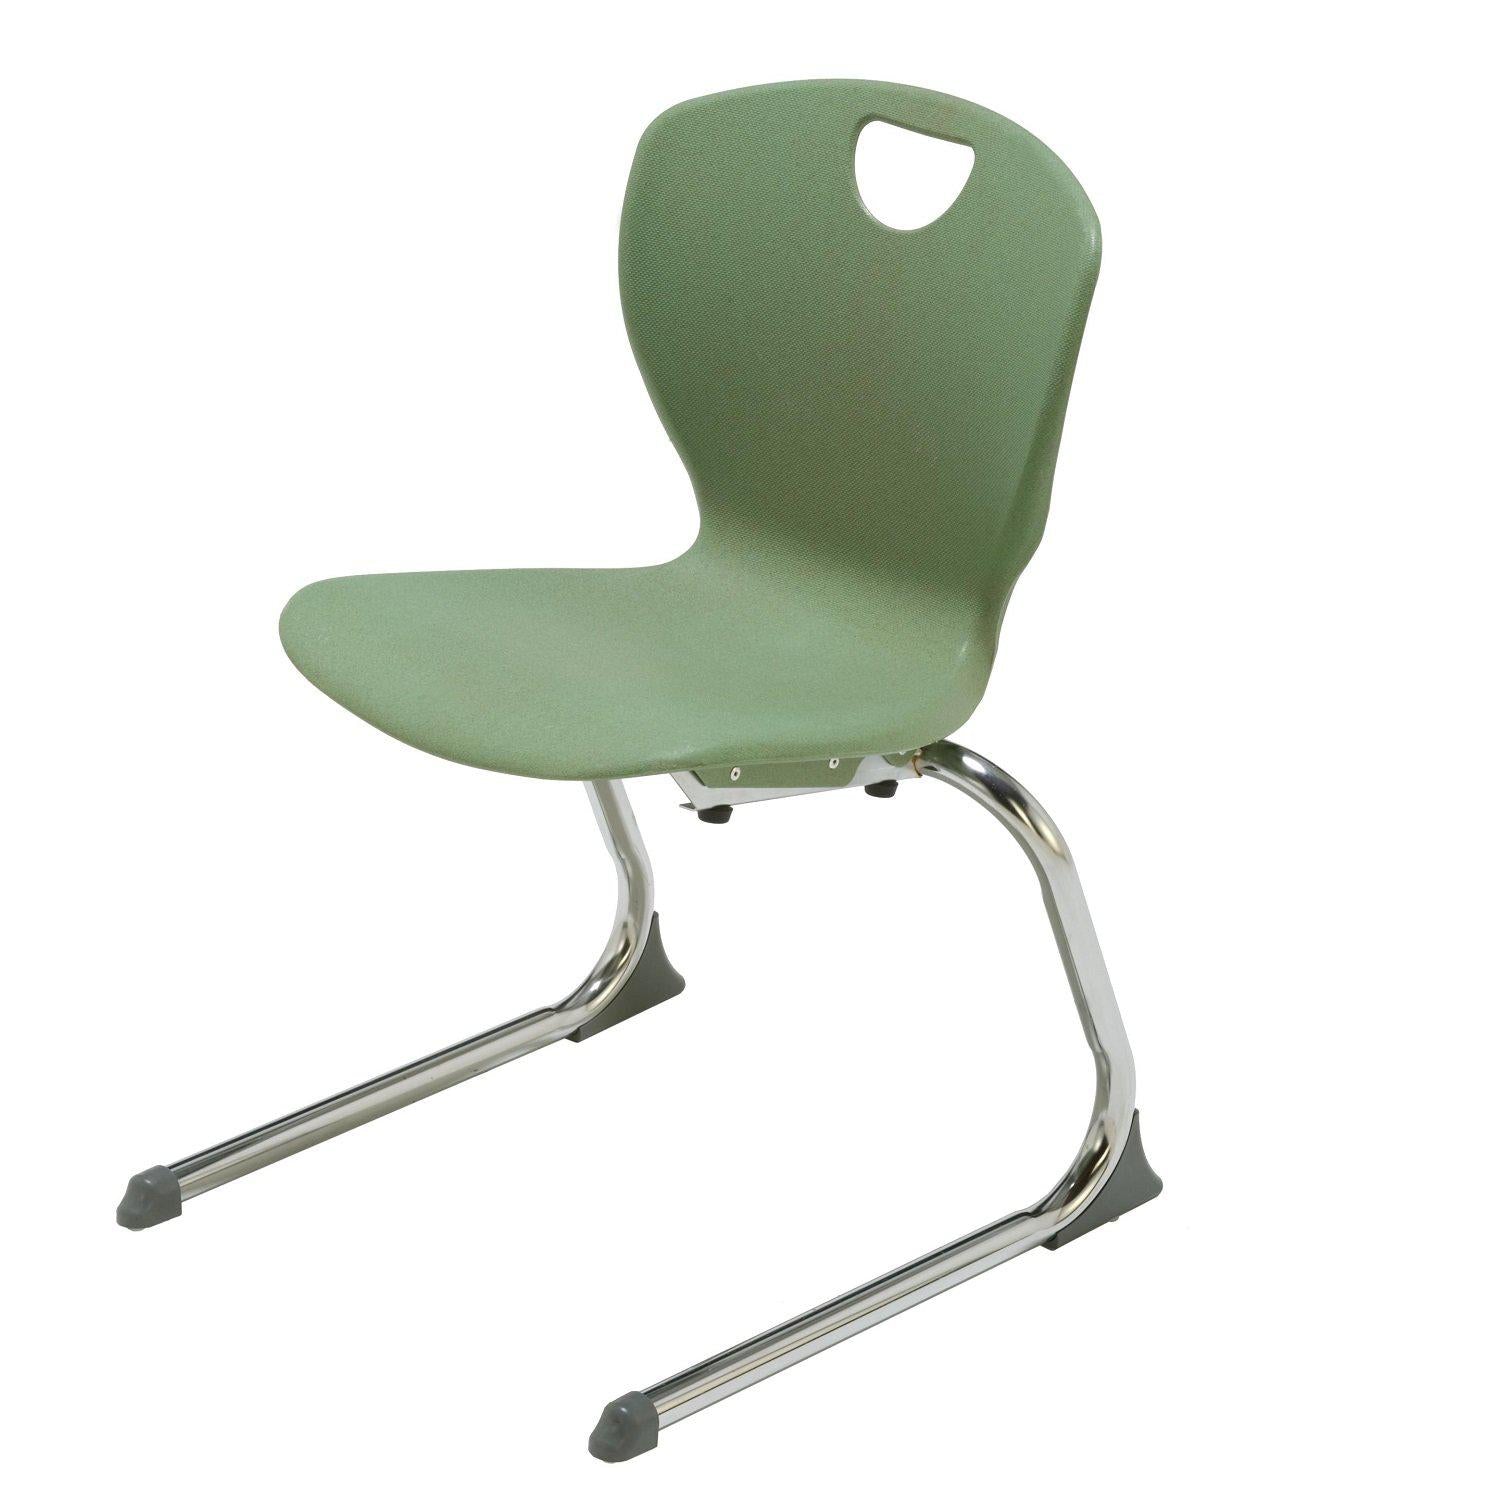 Ovation Cantilever Stacking Student Chair, 16" Seat Height